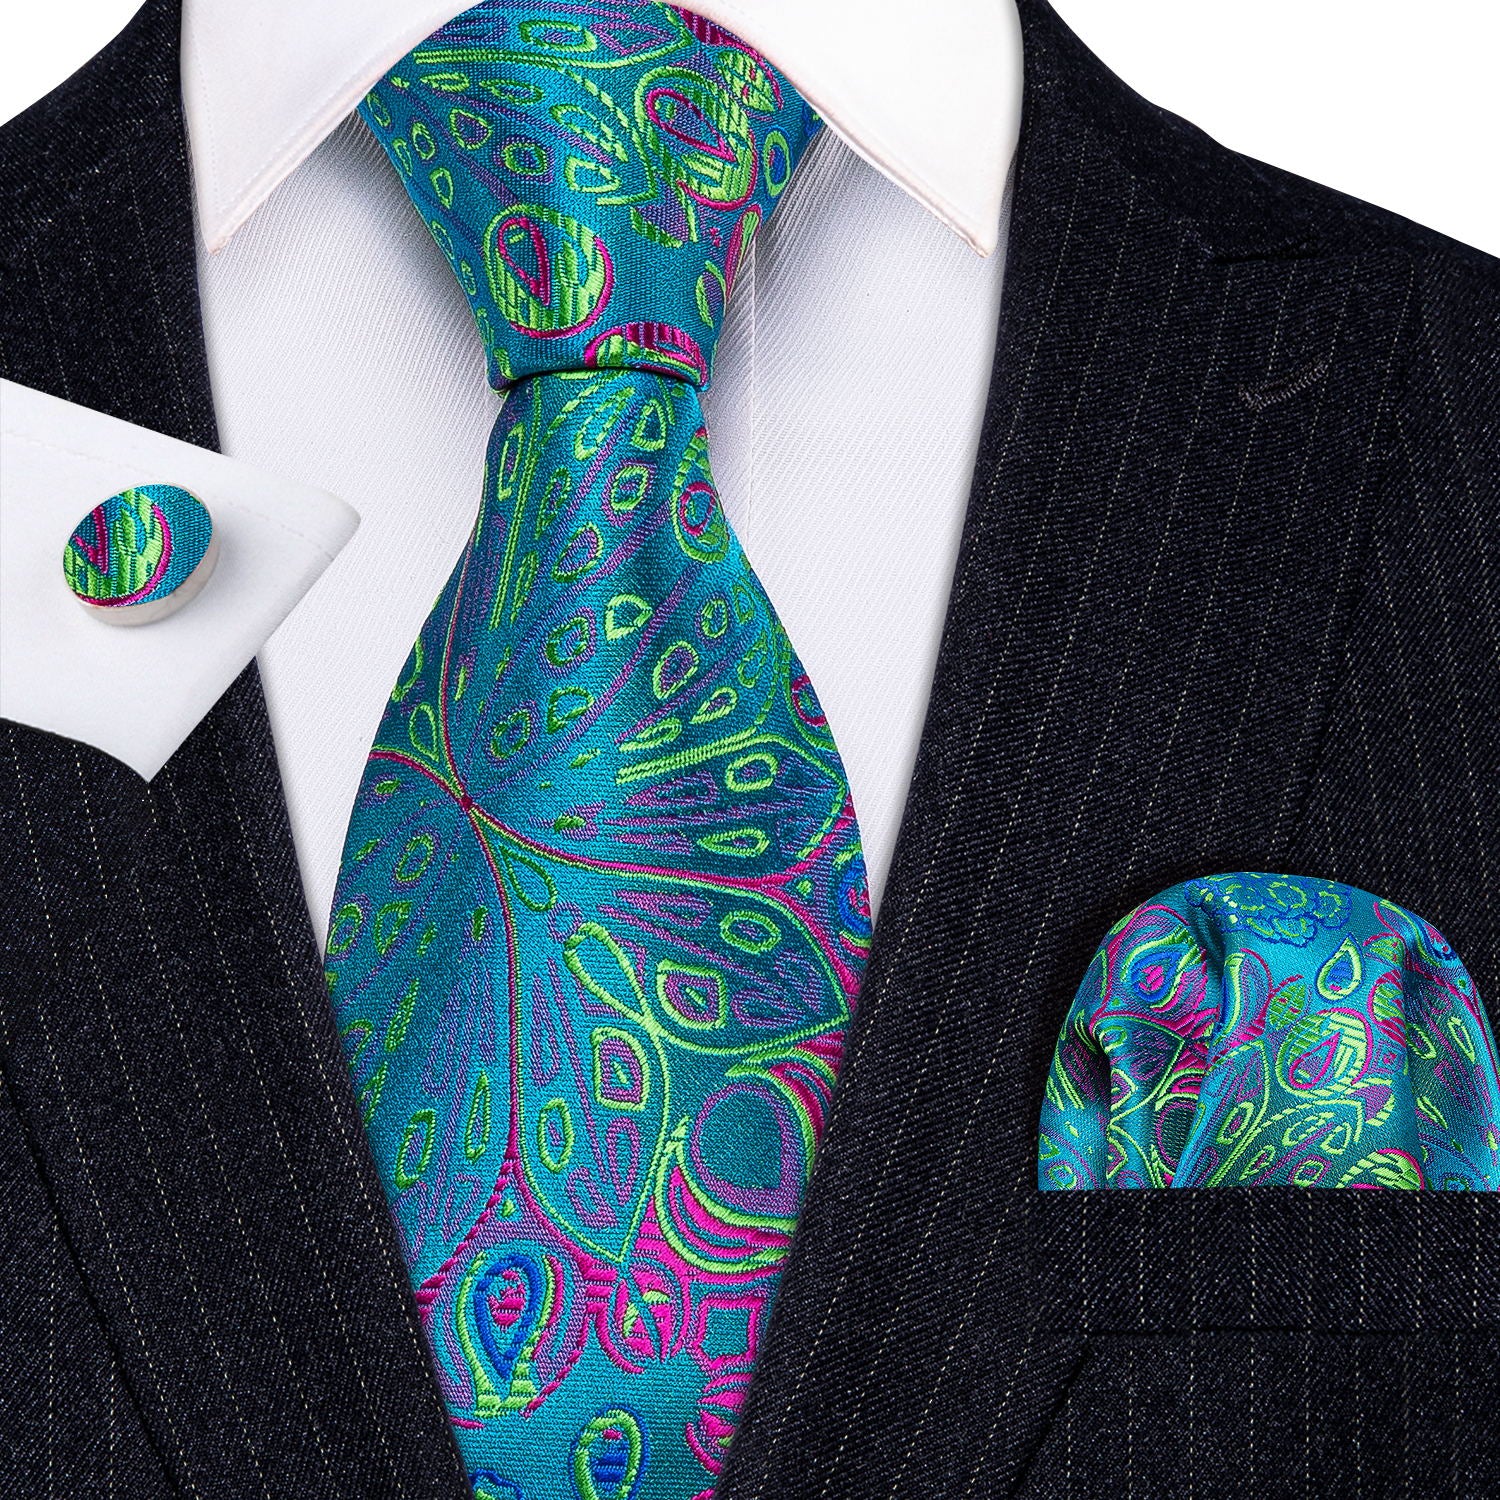 Barry Wang Blue Tie Green Floral Tie Pocket Square Cufflinks Set